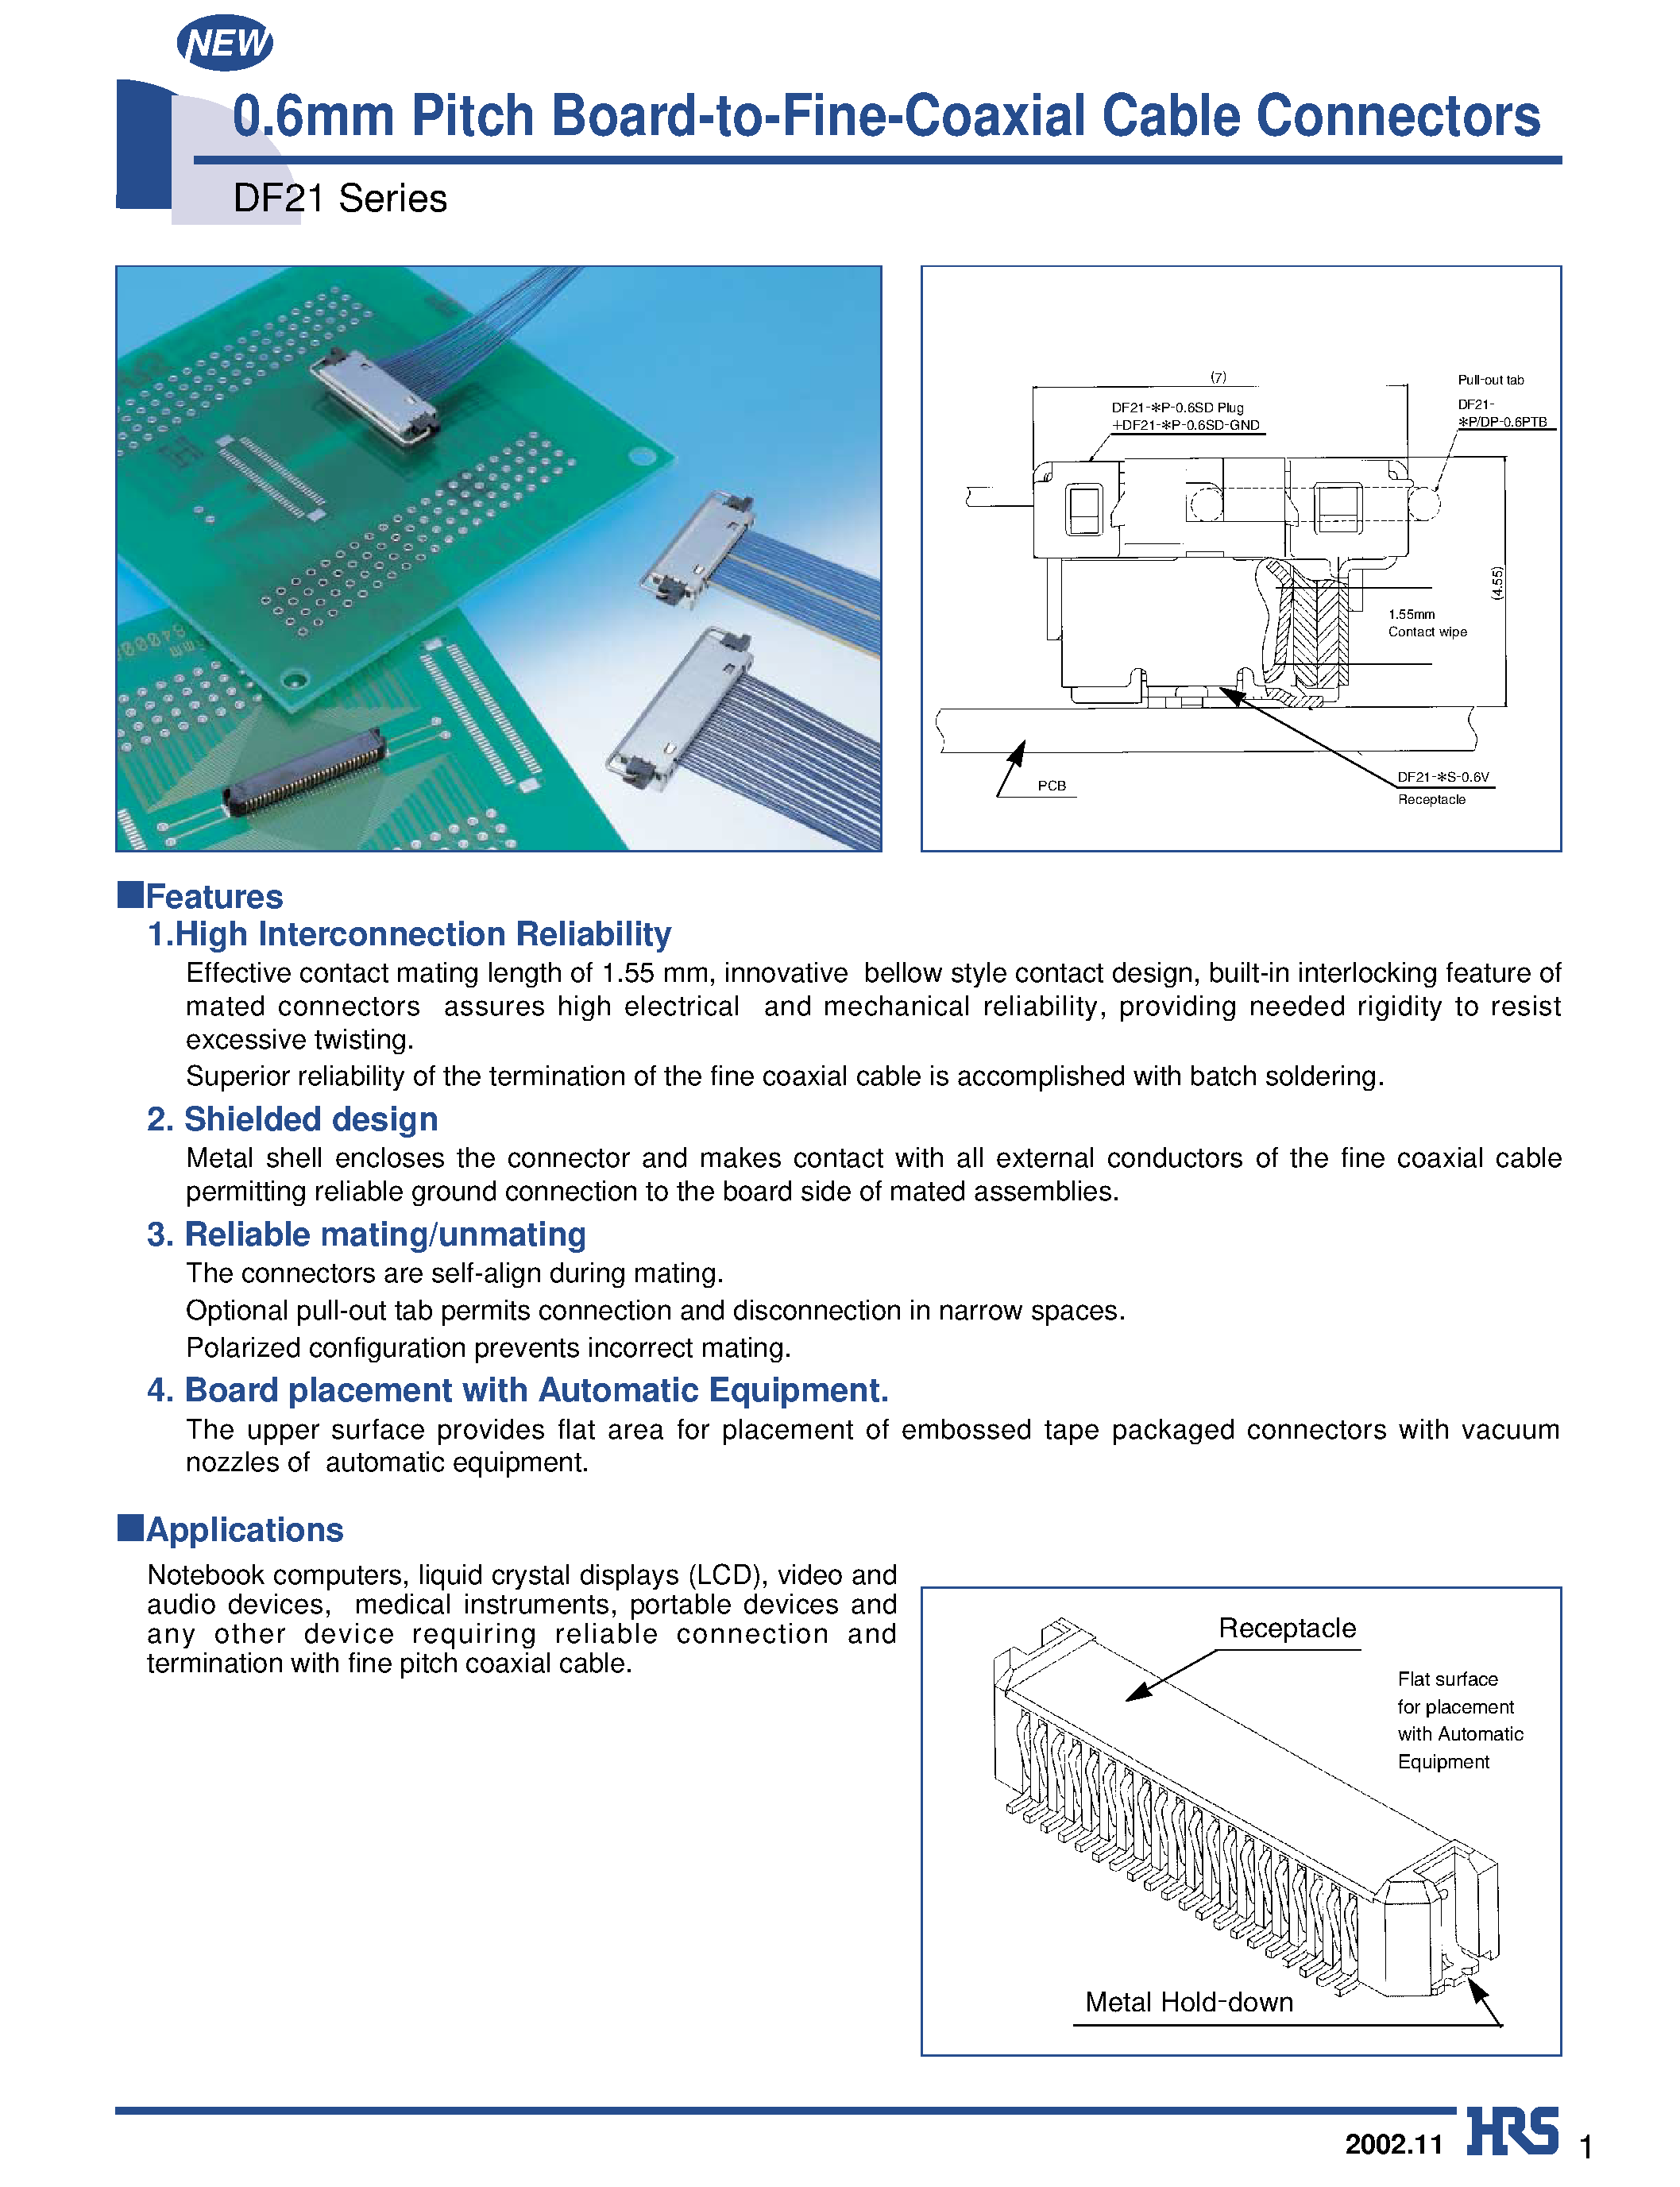 Datasheet DF21-30P-0.6PTB - 0.6mm Pitch Board-to-Fine-Coaxial Cable Connectors page 1